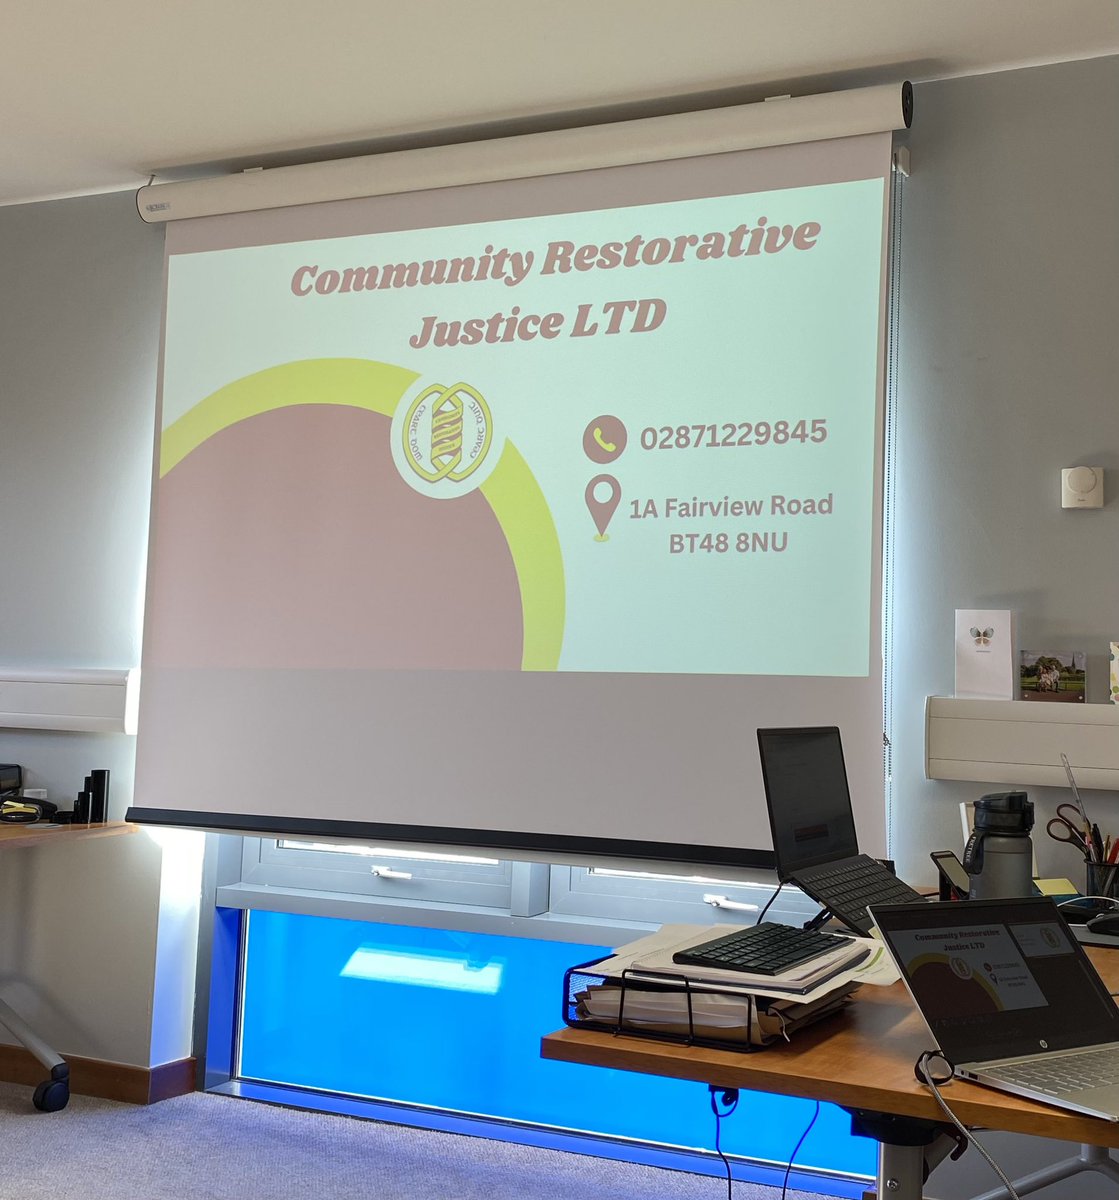 Thanks to Eamon from Community Restorative Justice for delivering a Scam awareness workshop with our volunteers. It is important we are aware and protect ourselves and advise others of scams and potential fraudulent activity. #BeScamAware